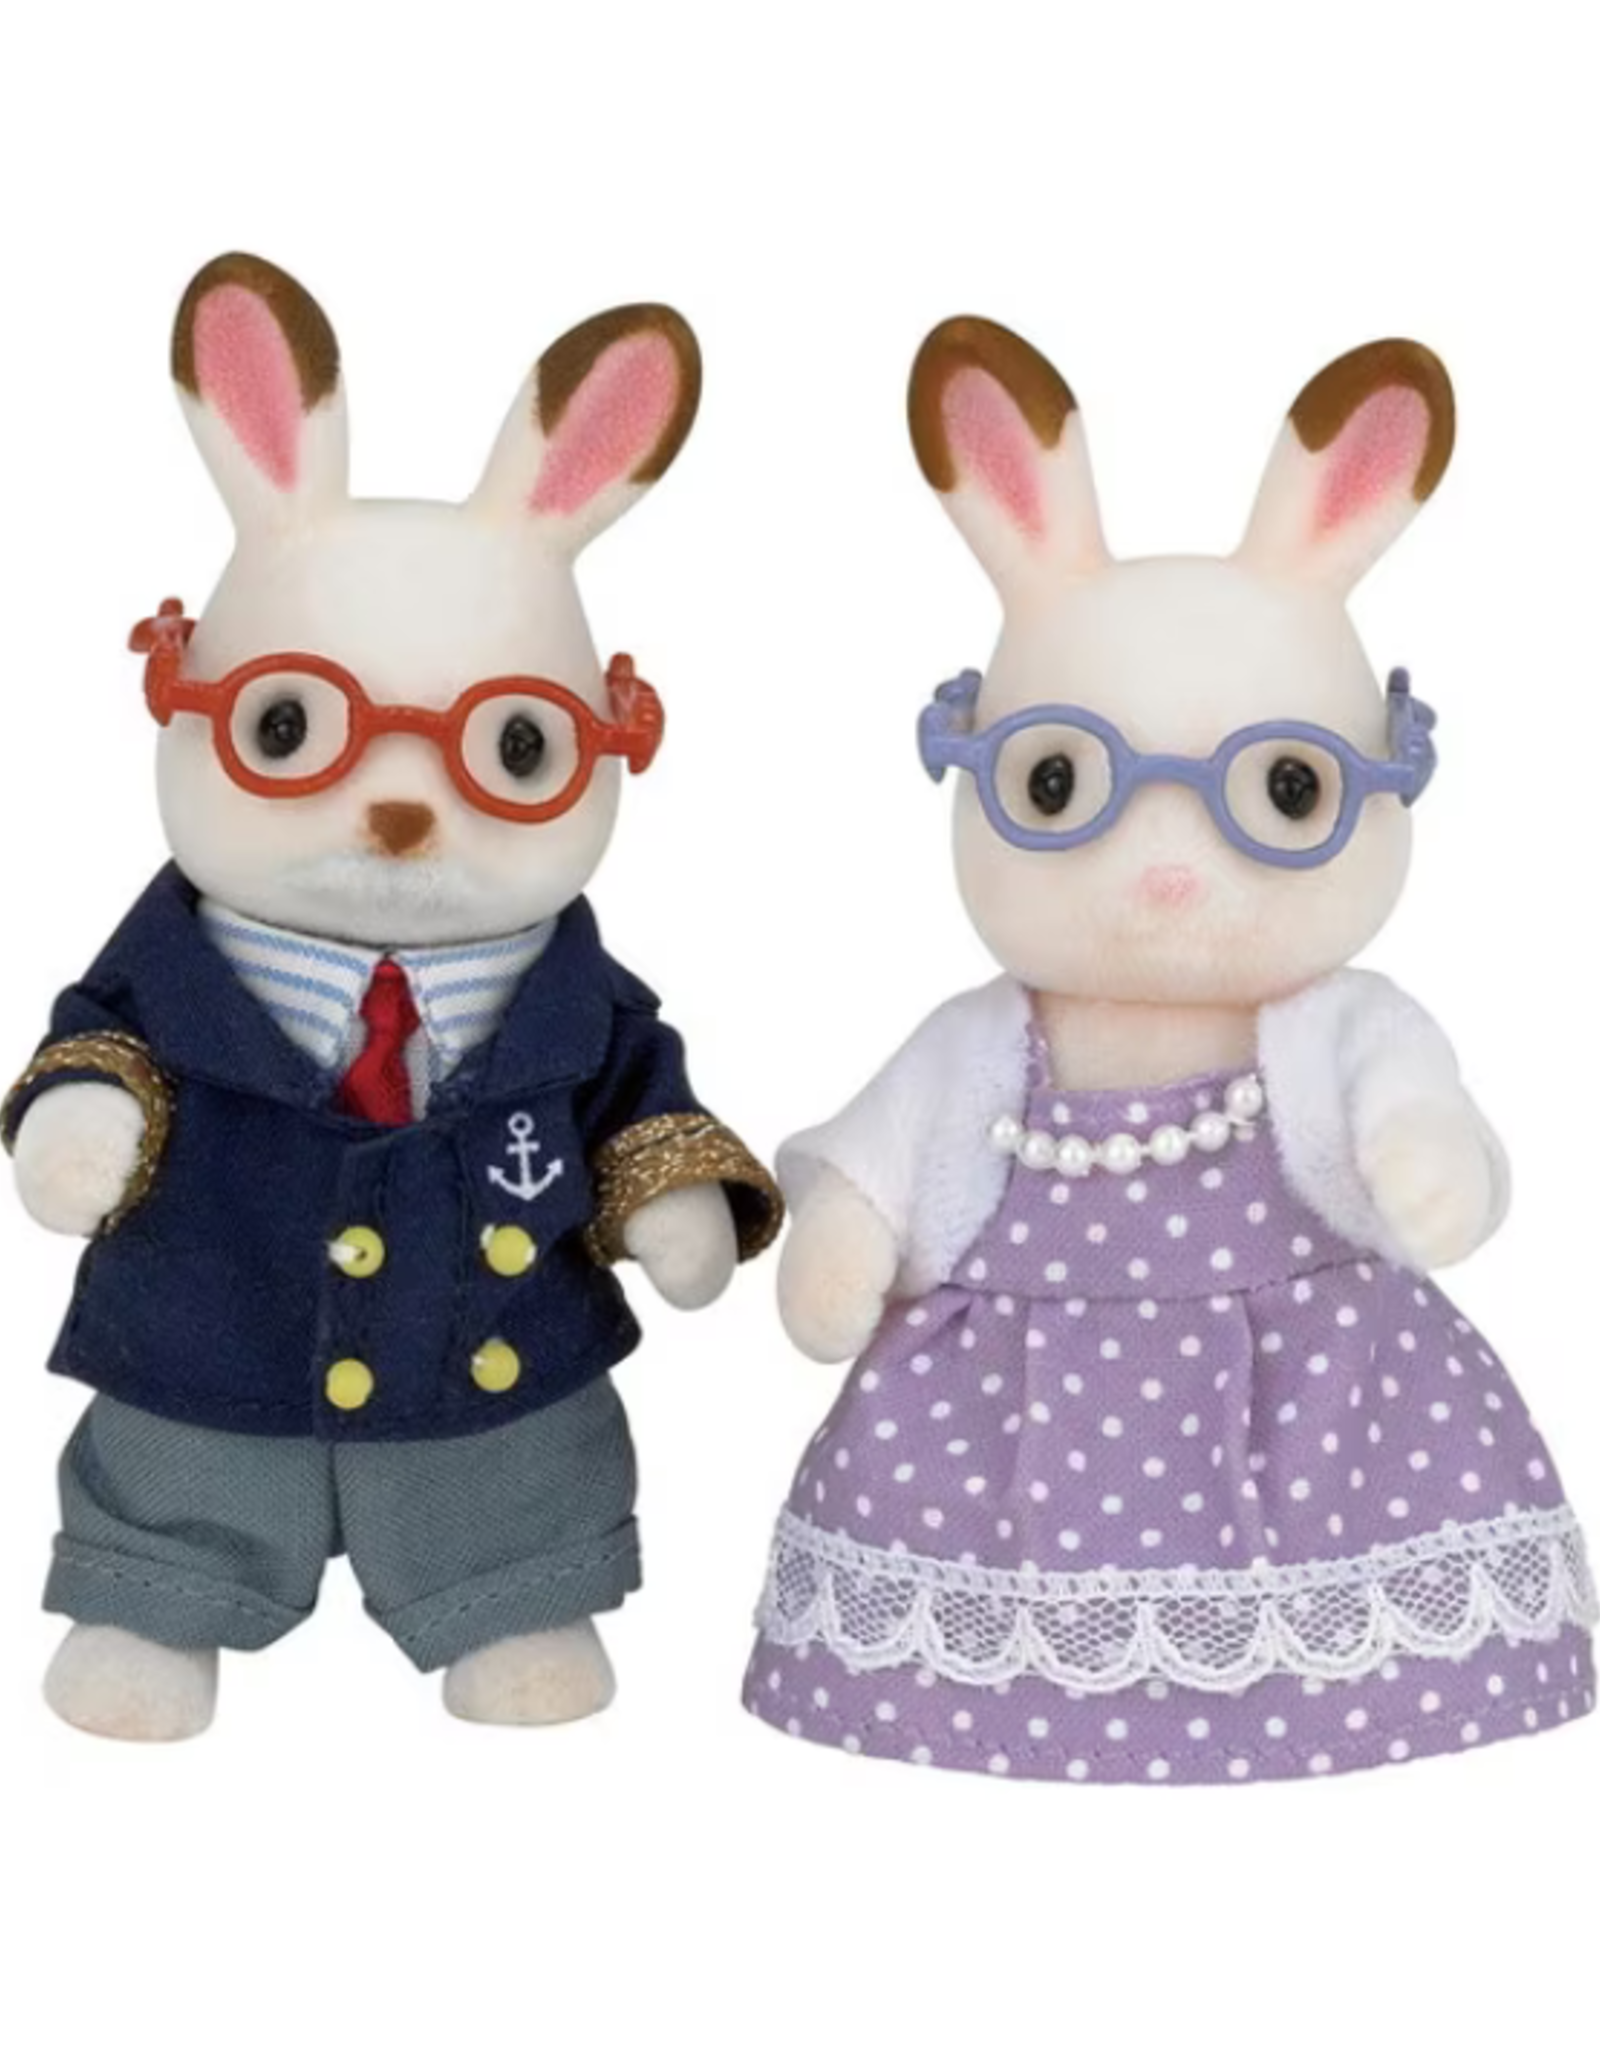 Calico Critters Calico Critters - Chocolate Rabbit Grandparents